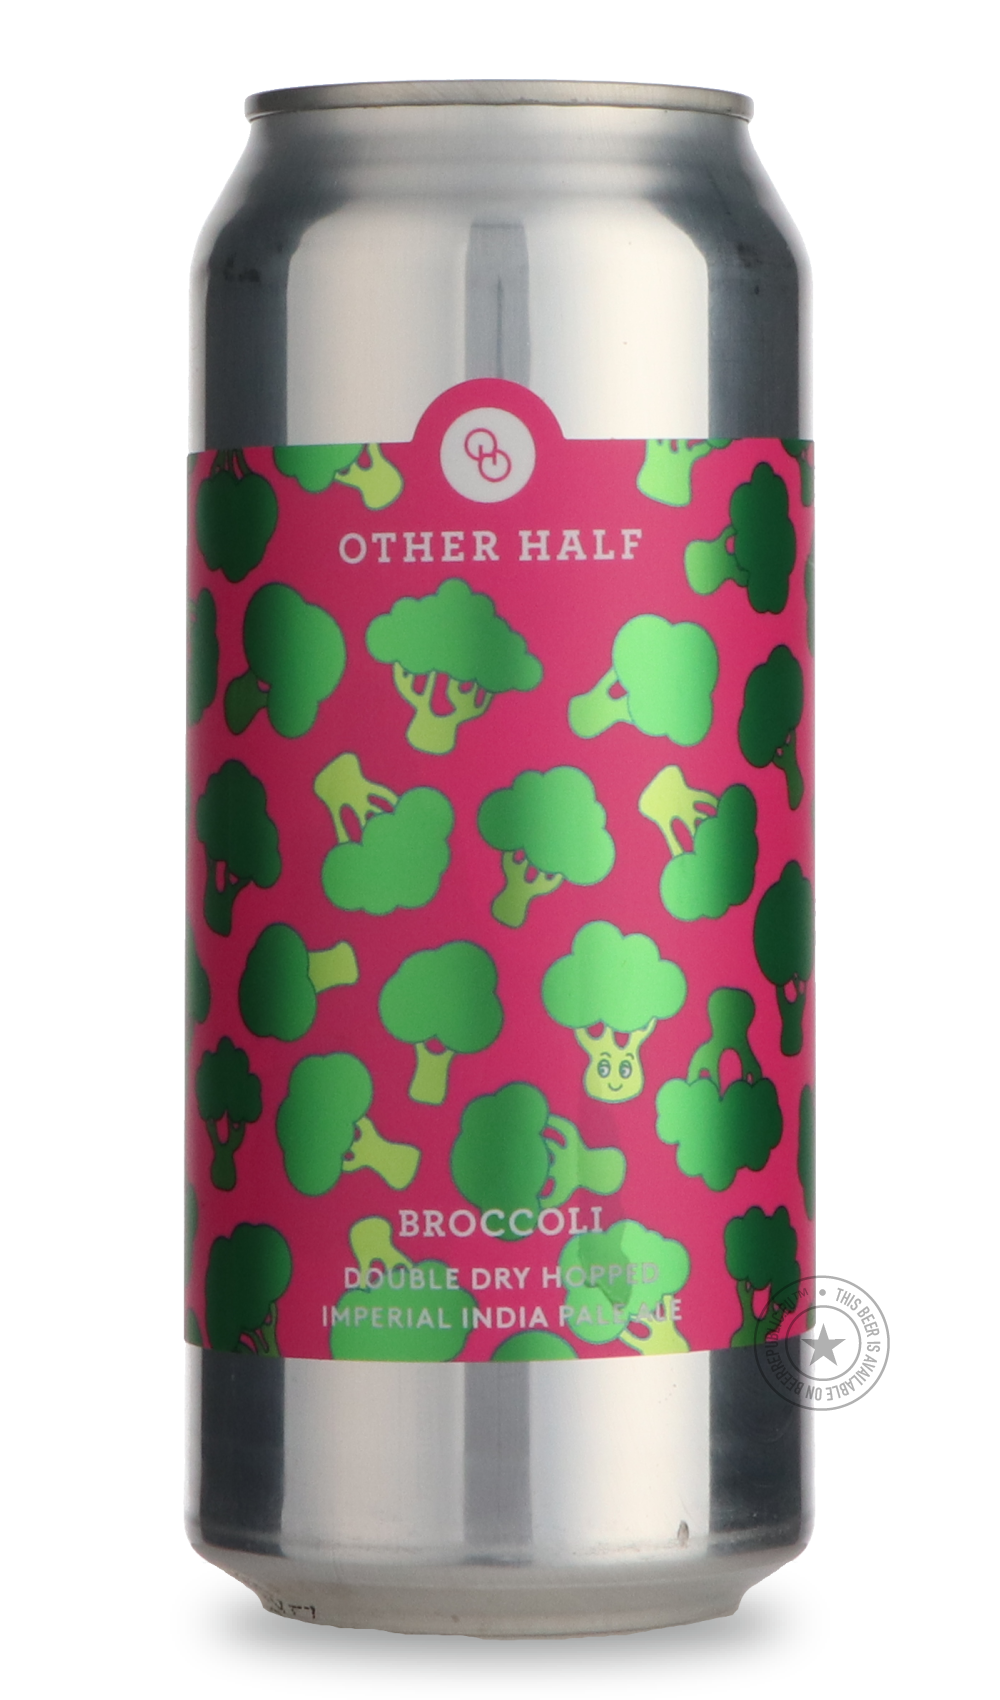 -Other Half- Broccoli-IPA- Only @ Beer Republic - The best online beer store for American & Canadian craft beer - Buy beer online from the USA and Canada - Bier online kopen - Amerikaans bier kopen - Craft beer store - Craft beer kopen - Amerikanisch bier kaufen - Bier online kaufen - Acheter biere online - IPA - Stout - Porter - New England IPA - Hazy IPA - Imperial Stout - Barrel Aged - Barrel Aged Imperial Stout - Brown - Dark beer - Blond - Blonde - Pilsner - Lager - Wheat - Weizen - Amber - Barley Wine